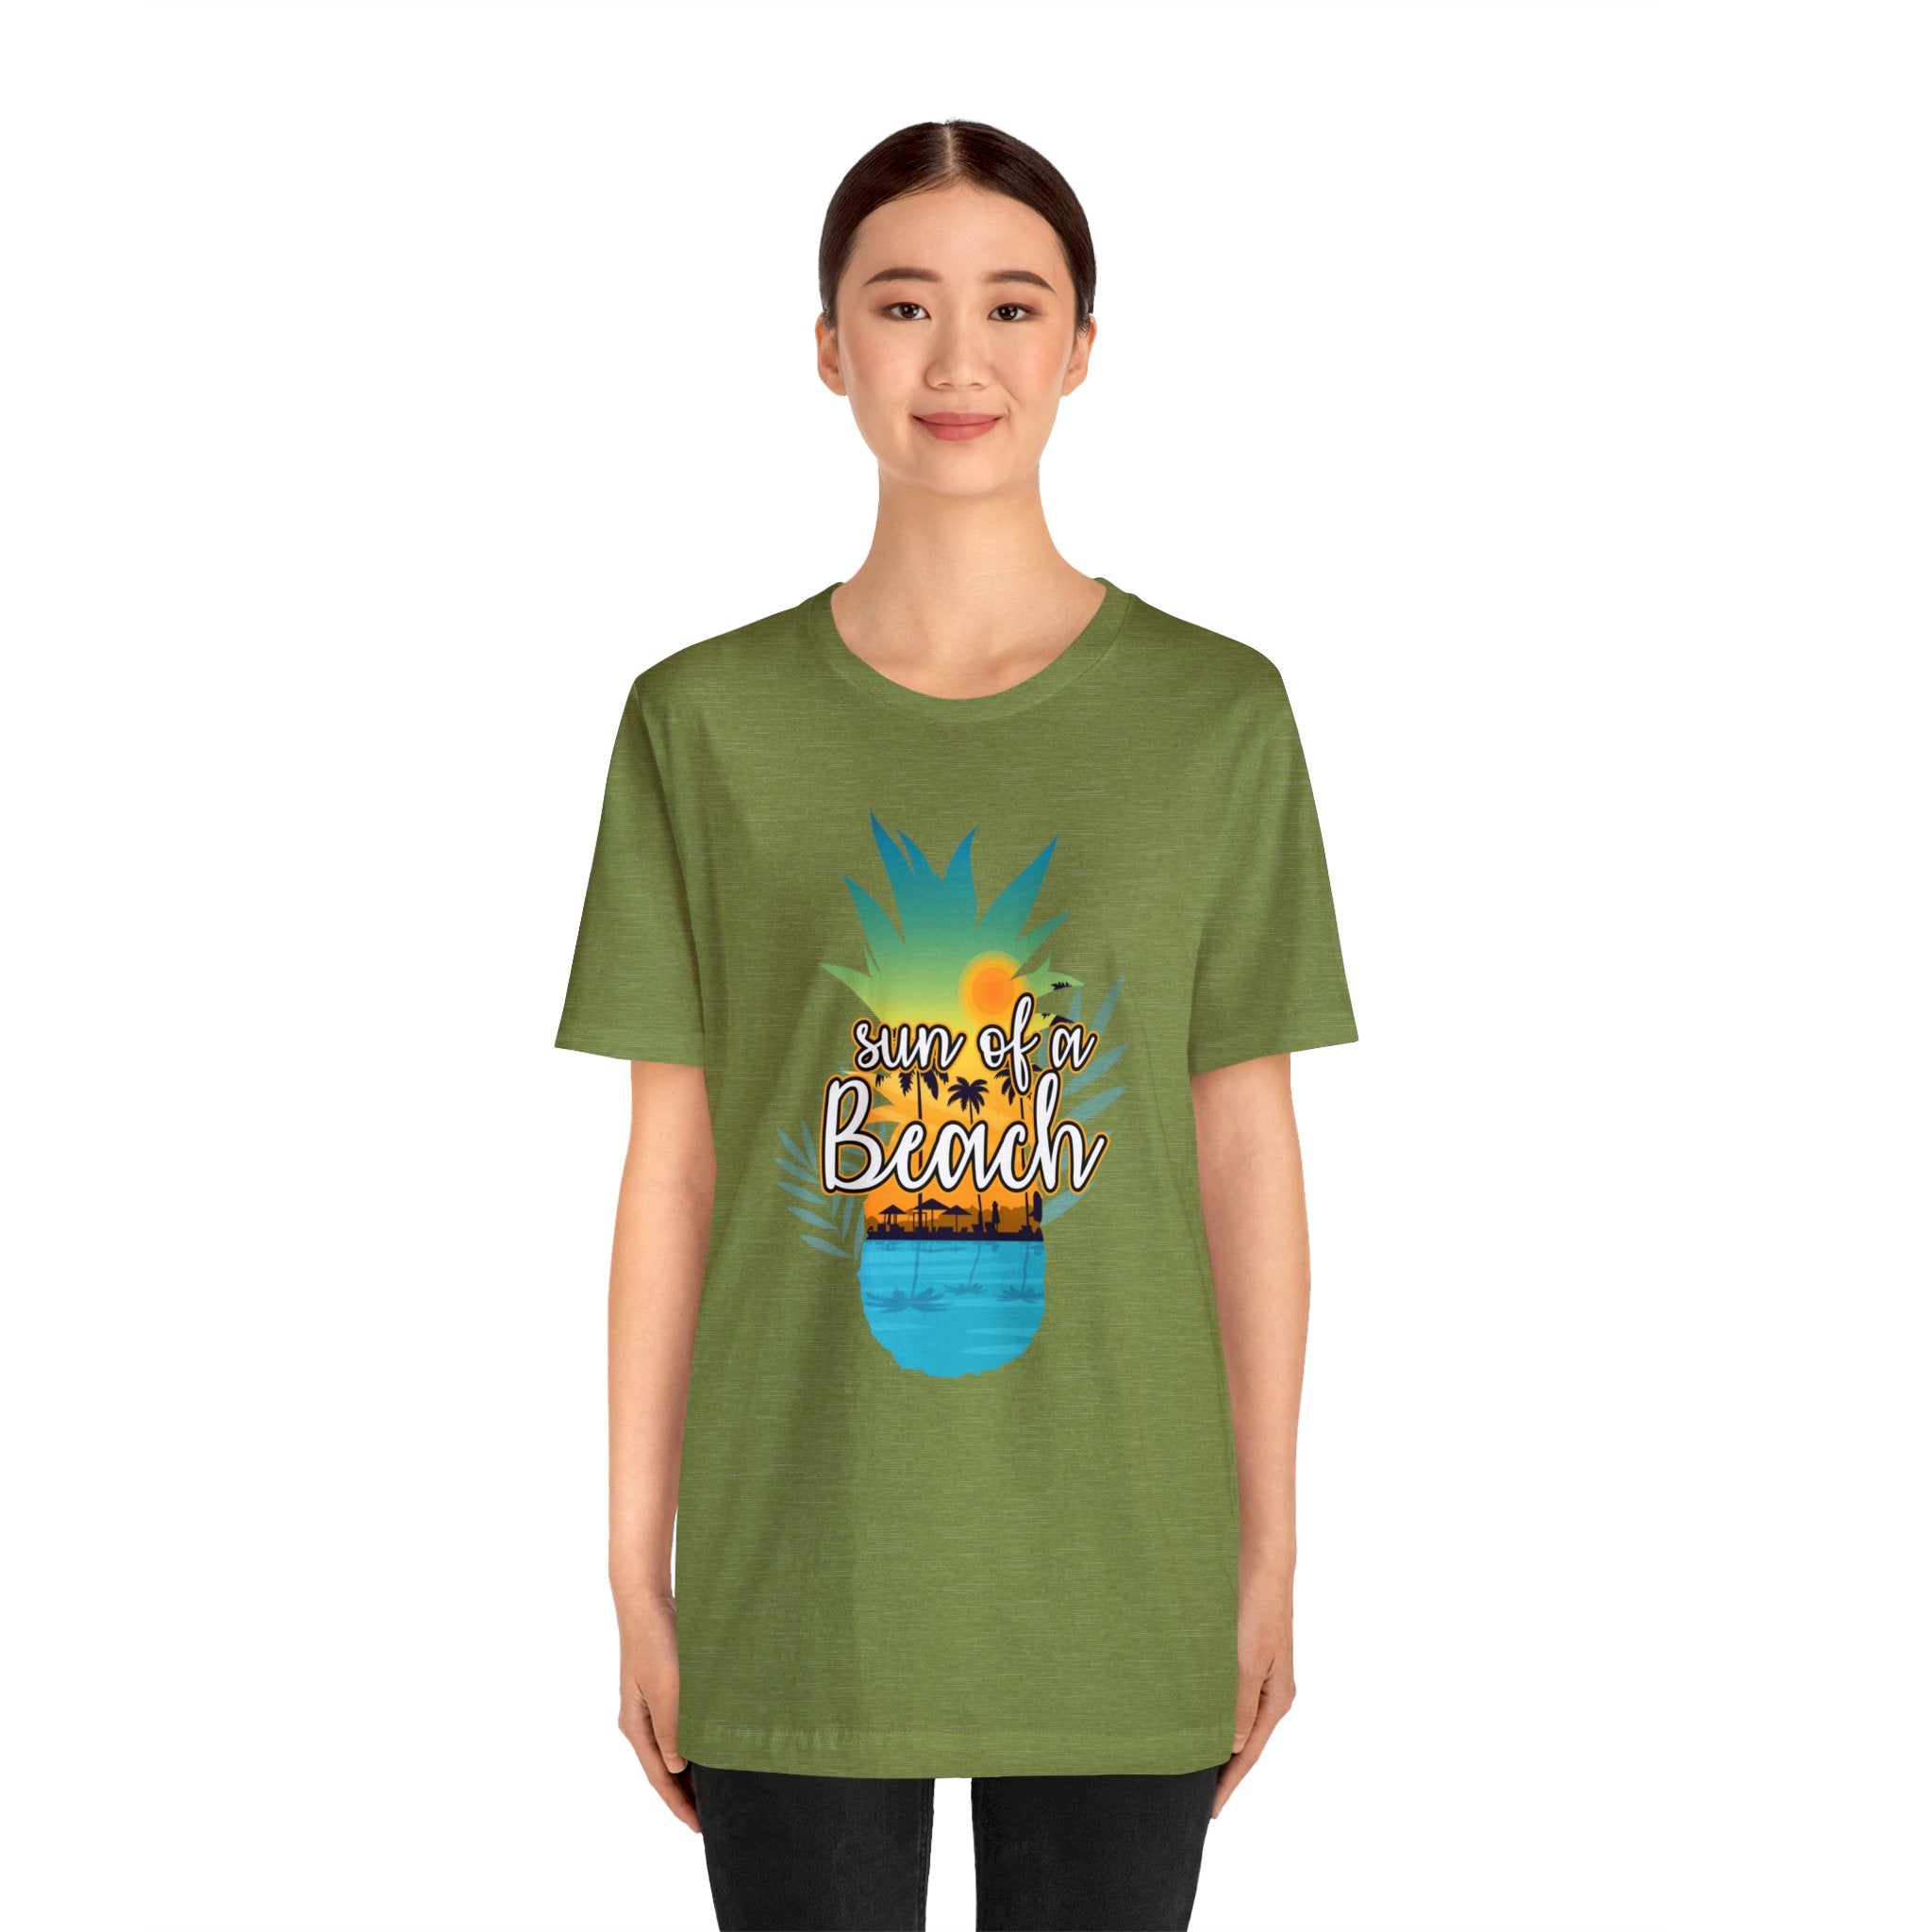 A woman wearing a green t-shirt while waiting to order her Sun of a Beach T-Shirt.